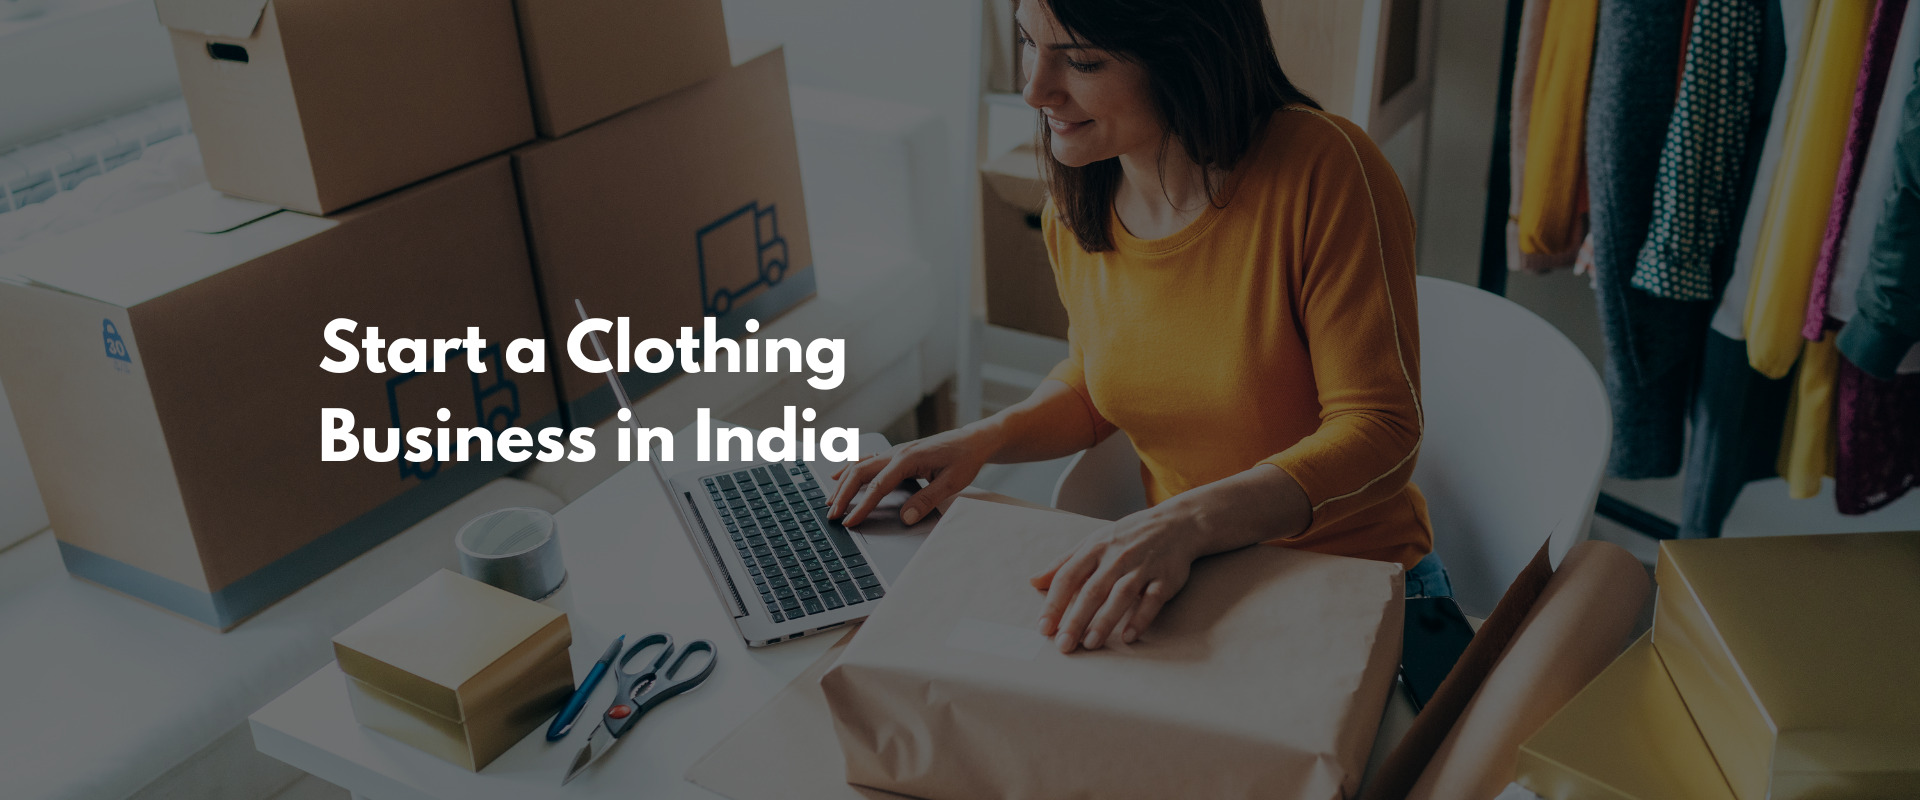 How To Start A Clothing Business Online In India?